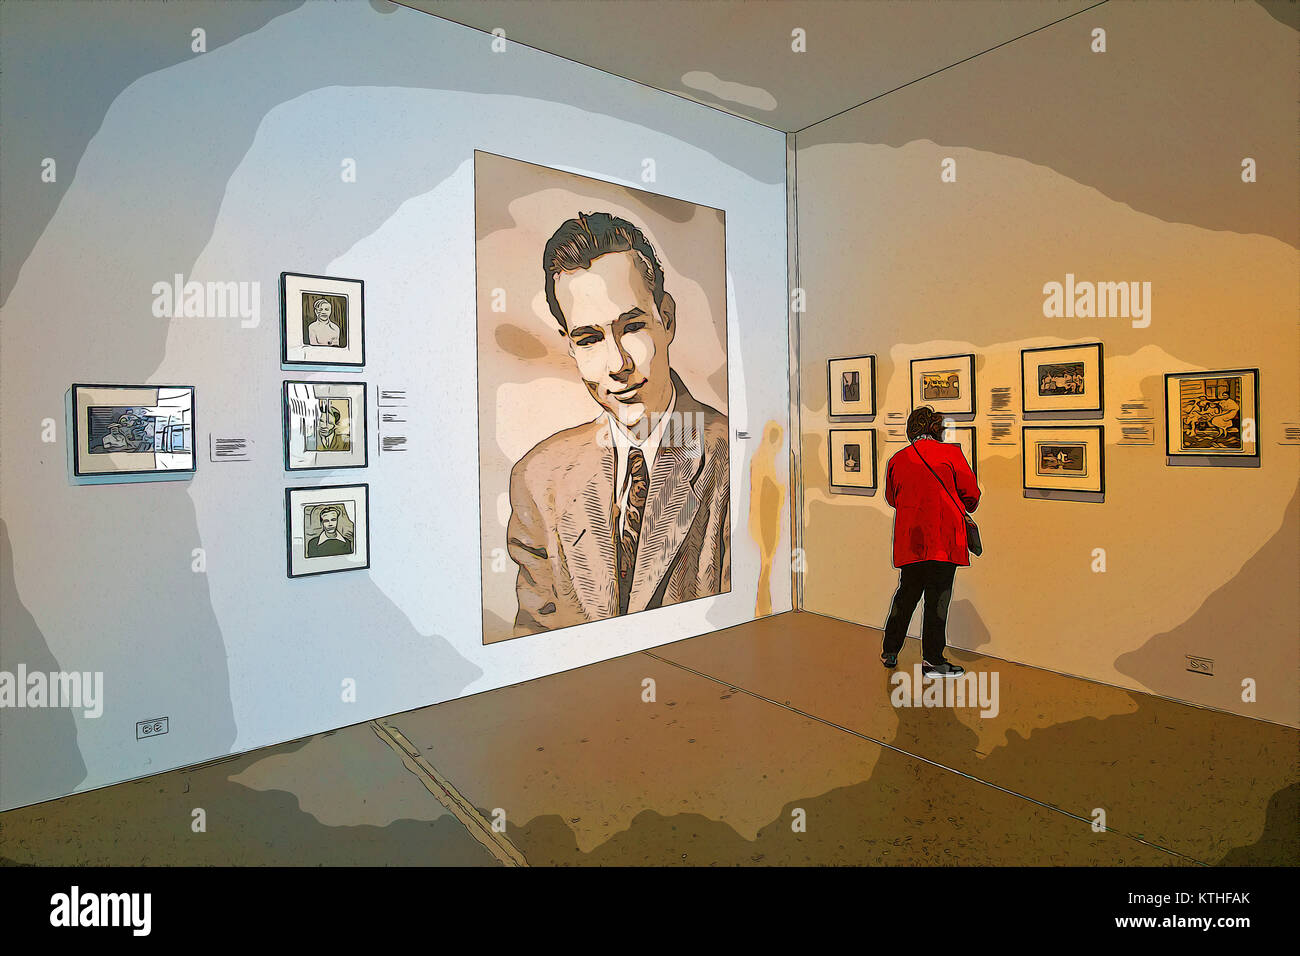 Photoshop treatment of a spectator looking at Warhol family photos exhibited at the Andy Warhol Museum in downtown Pittsburgh, Pennsylvania. Stock Photo